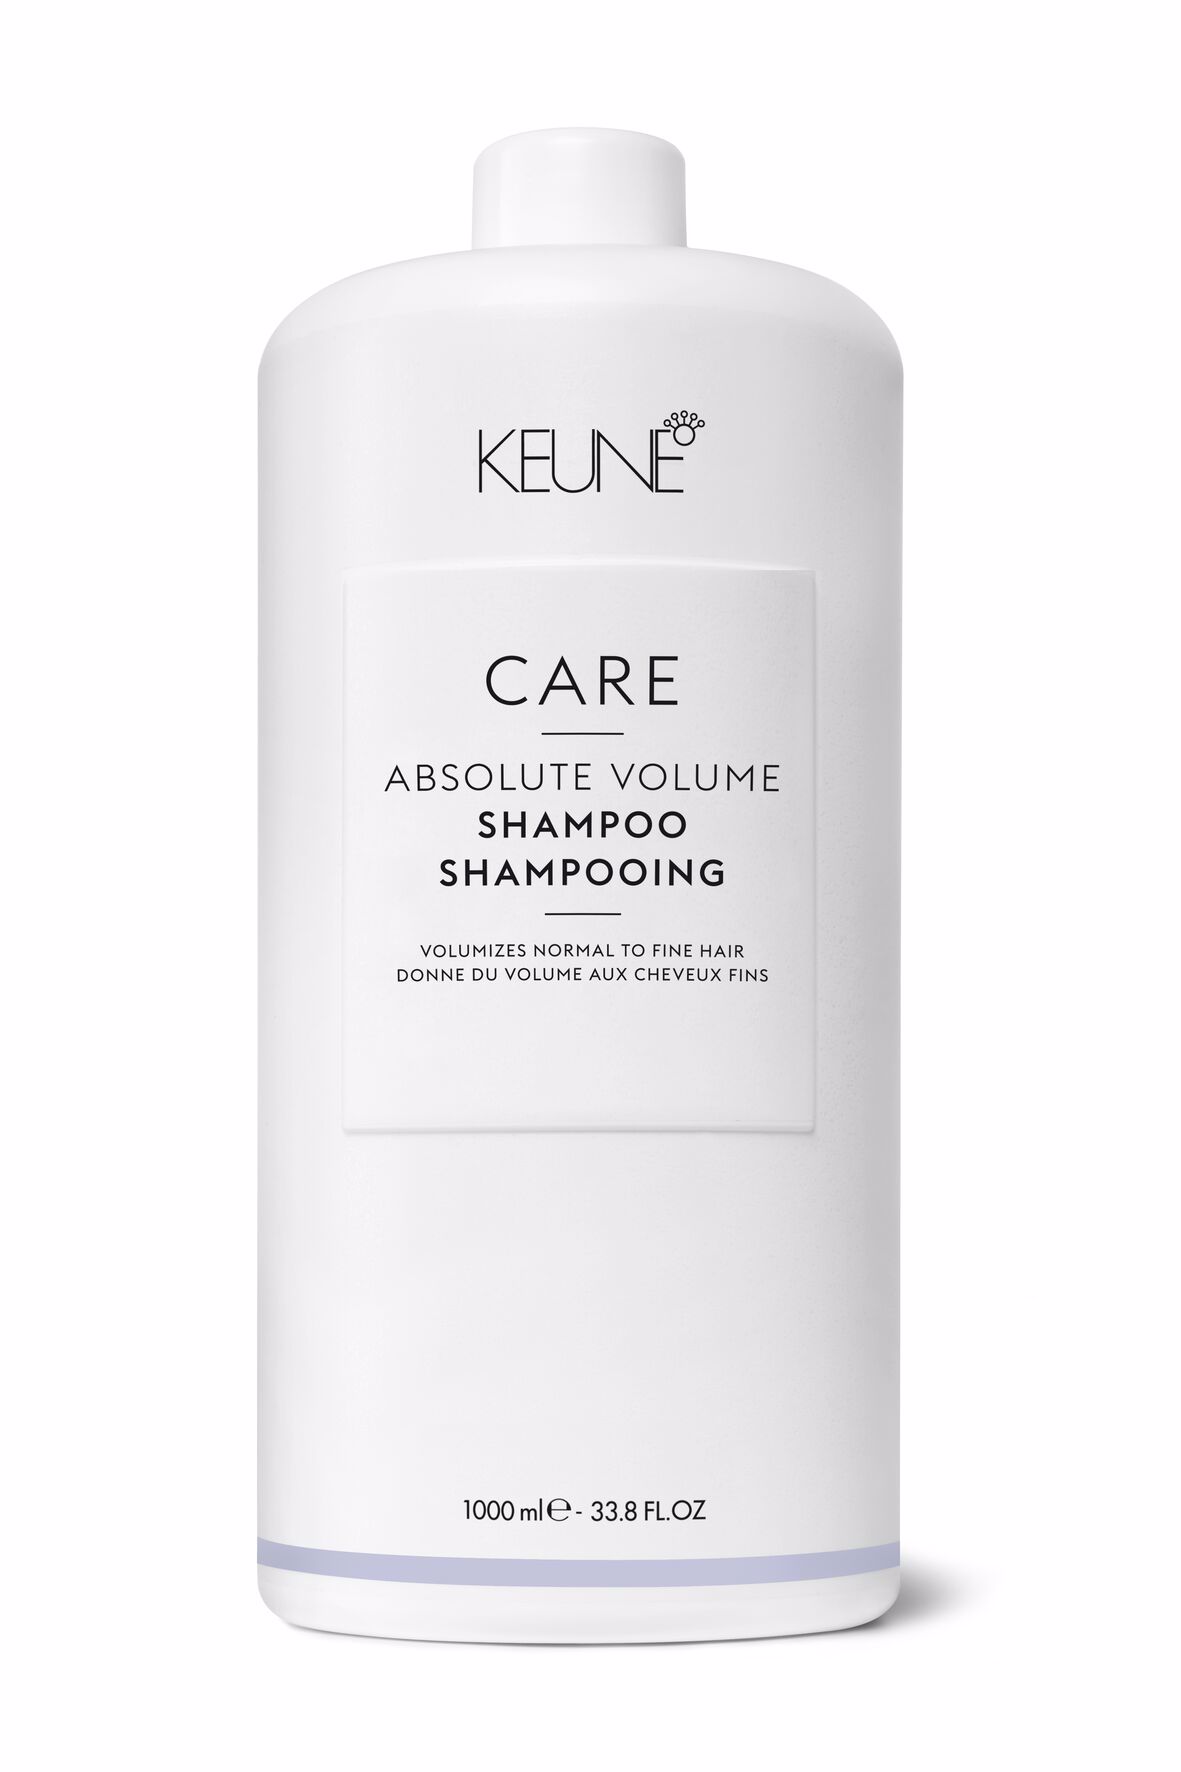 Try Care Absolute Volume Shampoo: Hair with volume without weighing it down. Hair treatment with Pro-Vitamin B5 and wheat proteins for the perfect hair structure. Available on keune.ch.